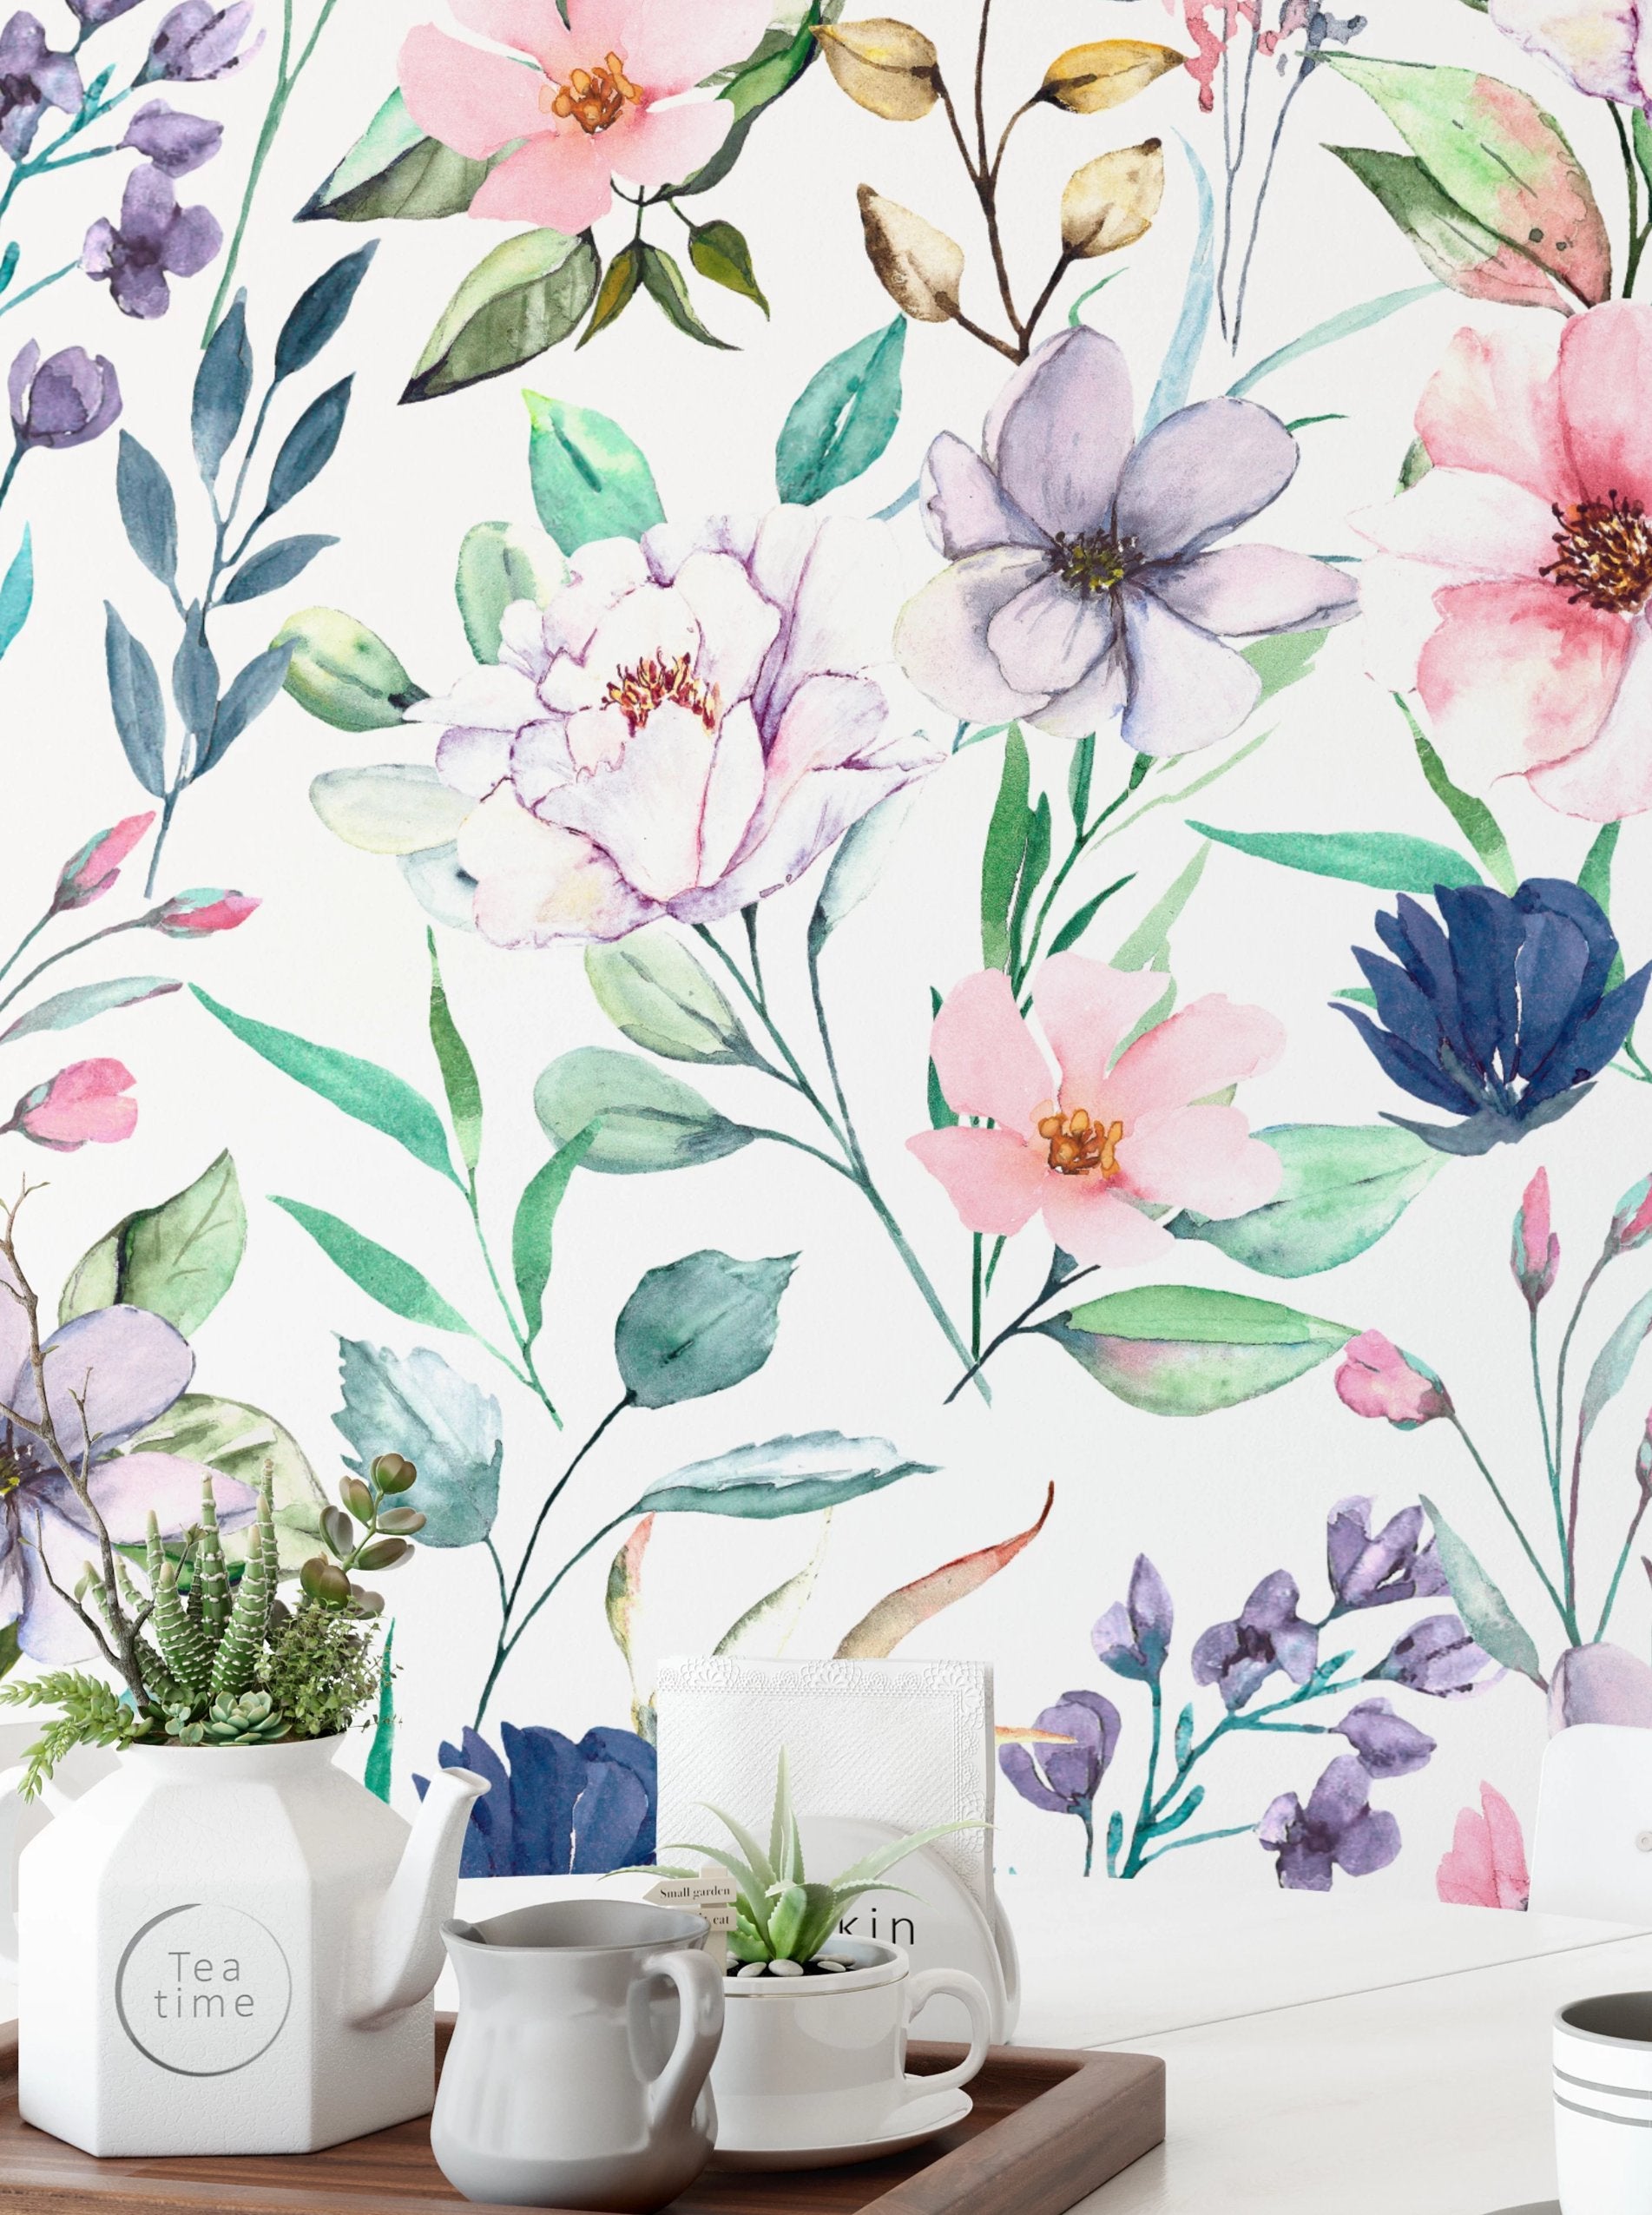 A close-up view of the Watercolor Floral Wallpaper IV in medium, with vibrant watercolor flowers and leaves in pinks, purples, and greens, enhancing a home setting with a tea time arrangement.